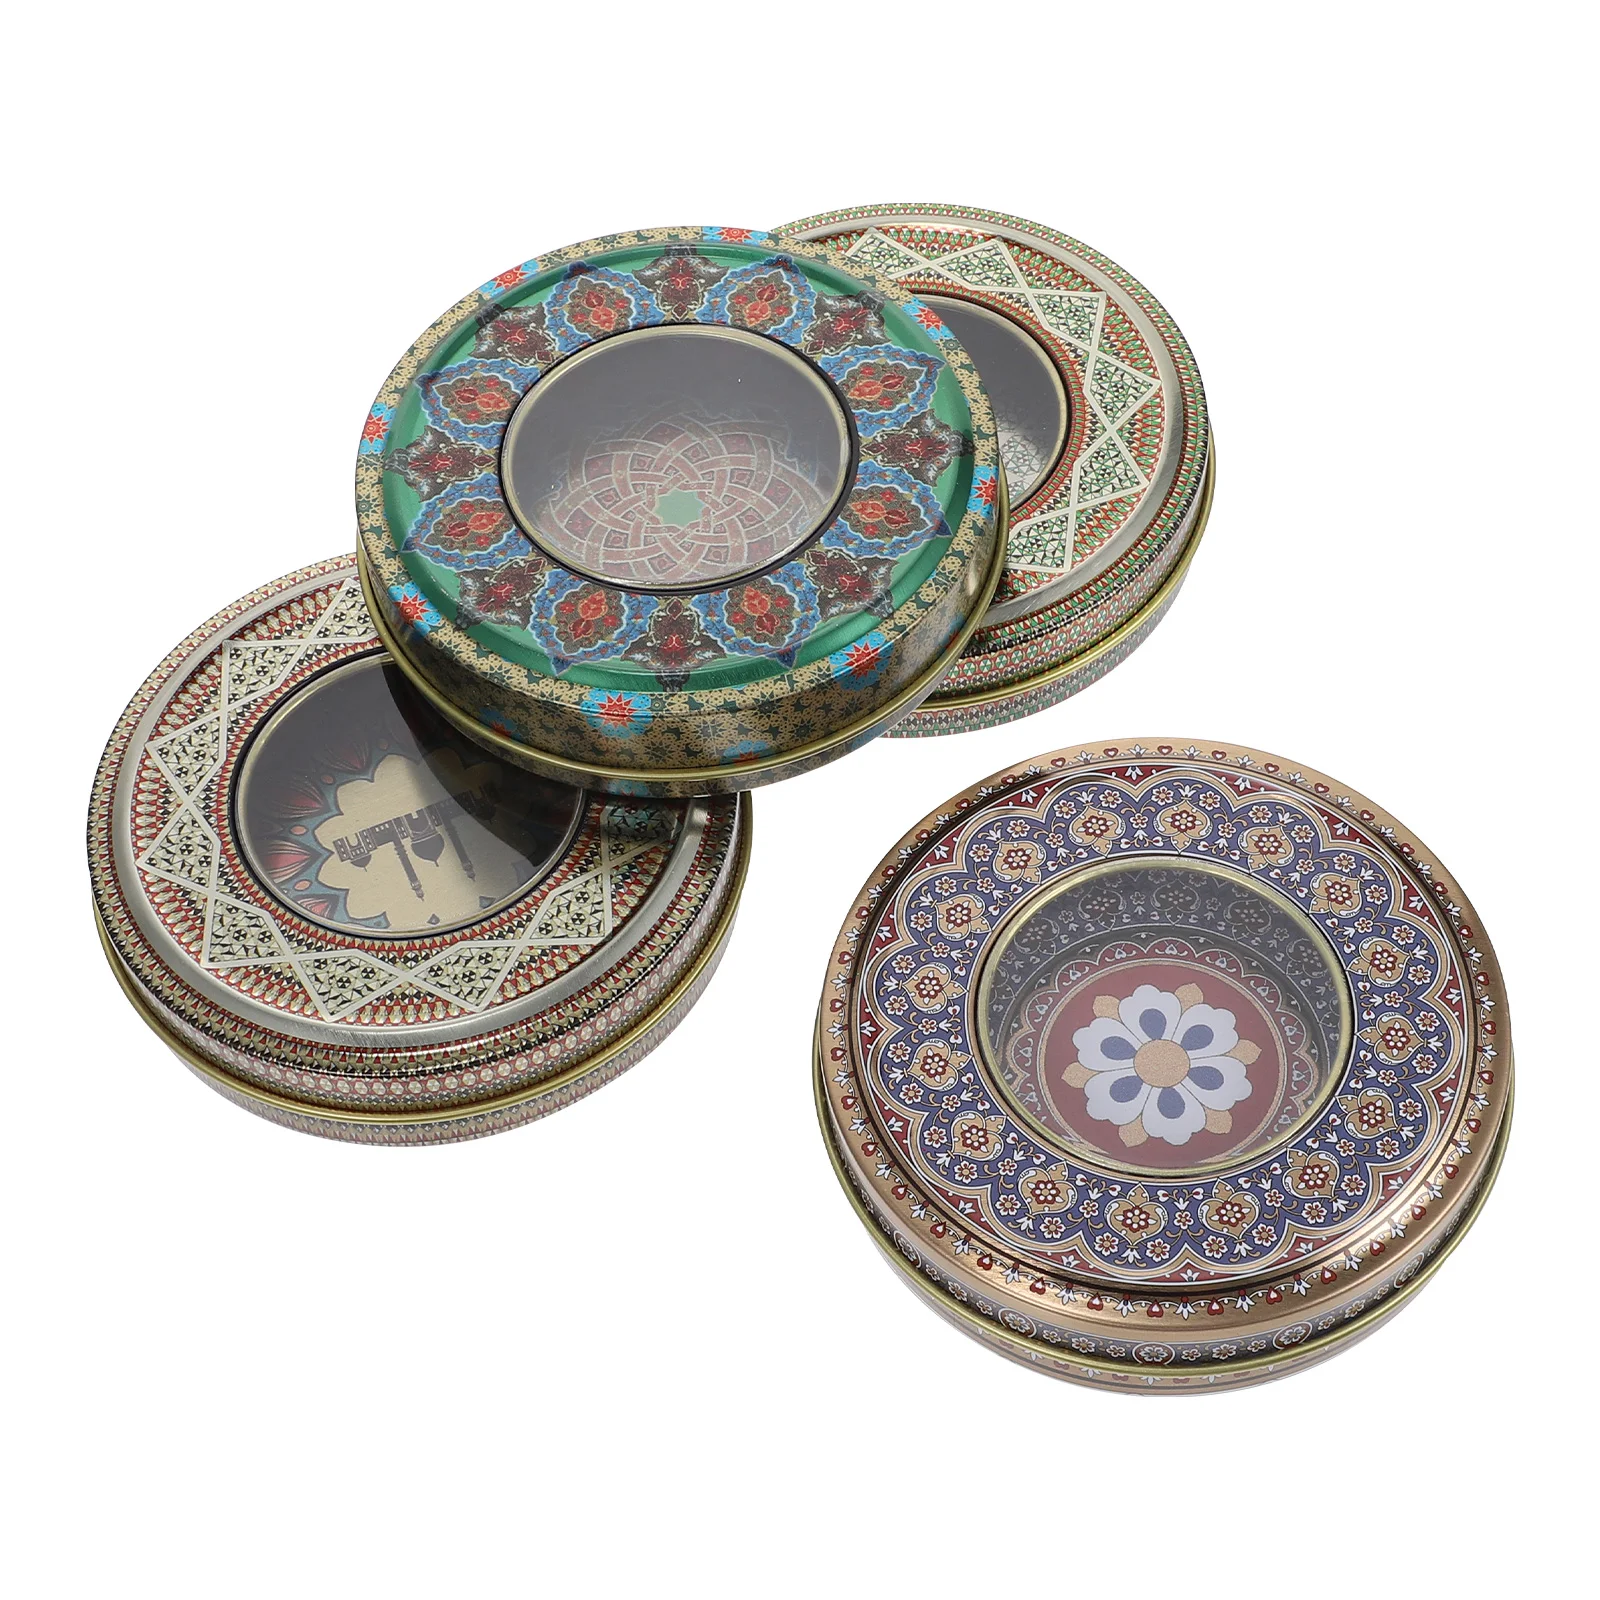 

Tin Saffron Storage Boxes Jar Empty Container Cans Tins Tealidsmetal Tinplate Canister Premium Round Holders Wrapping Emtpy